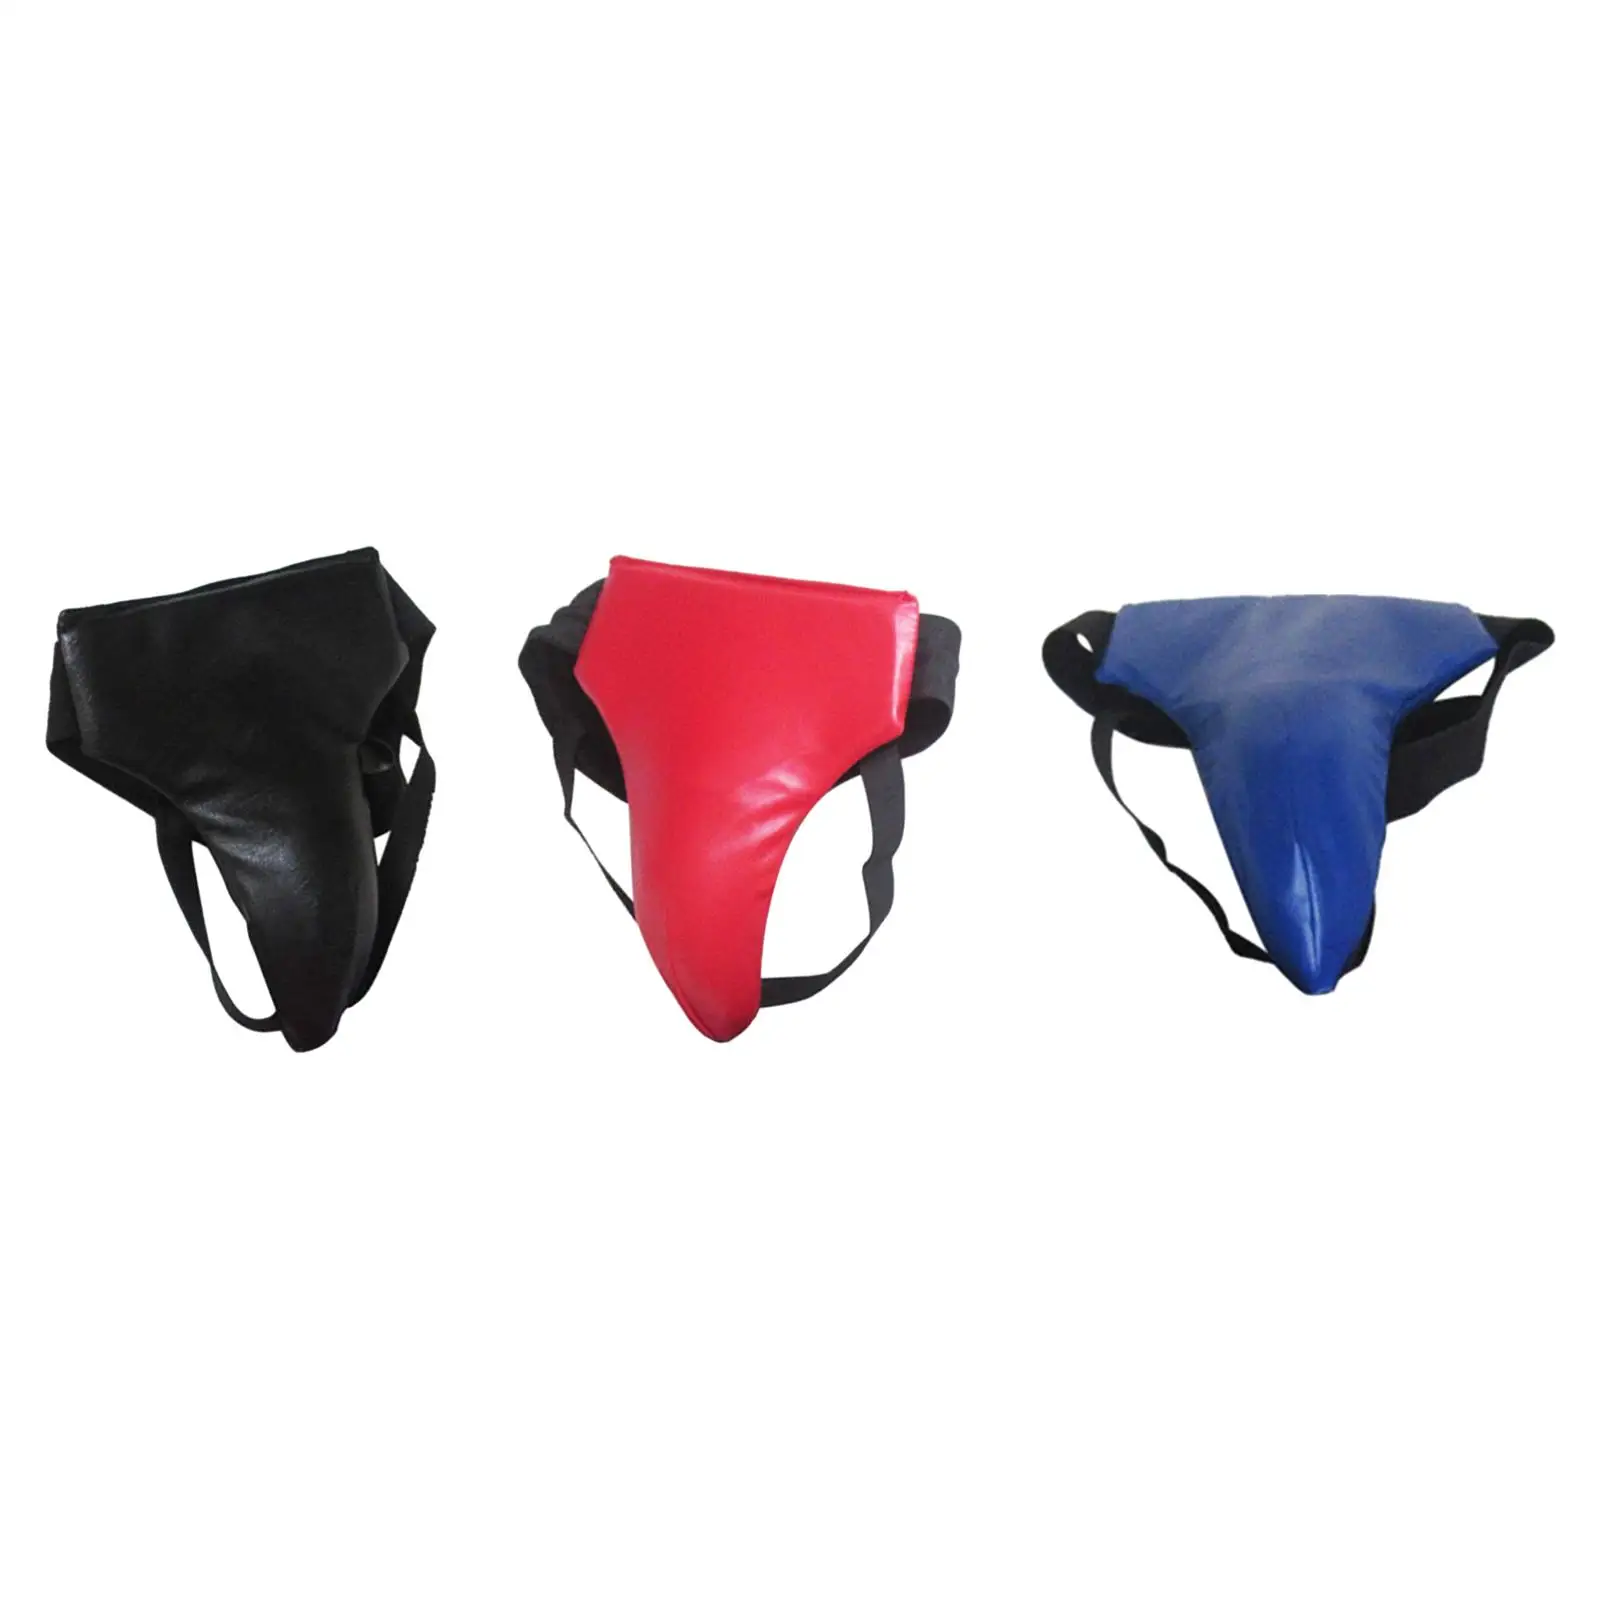 Groin Protector for Boxing Portable for Martial Arts Mma Training Fighting